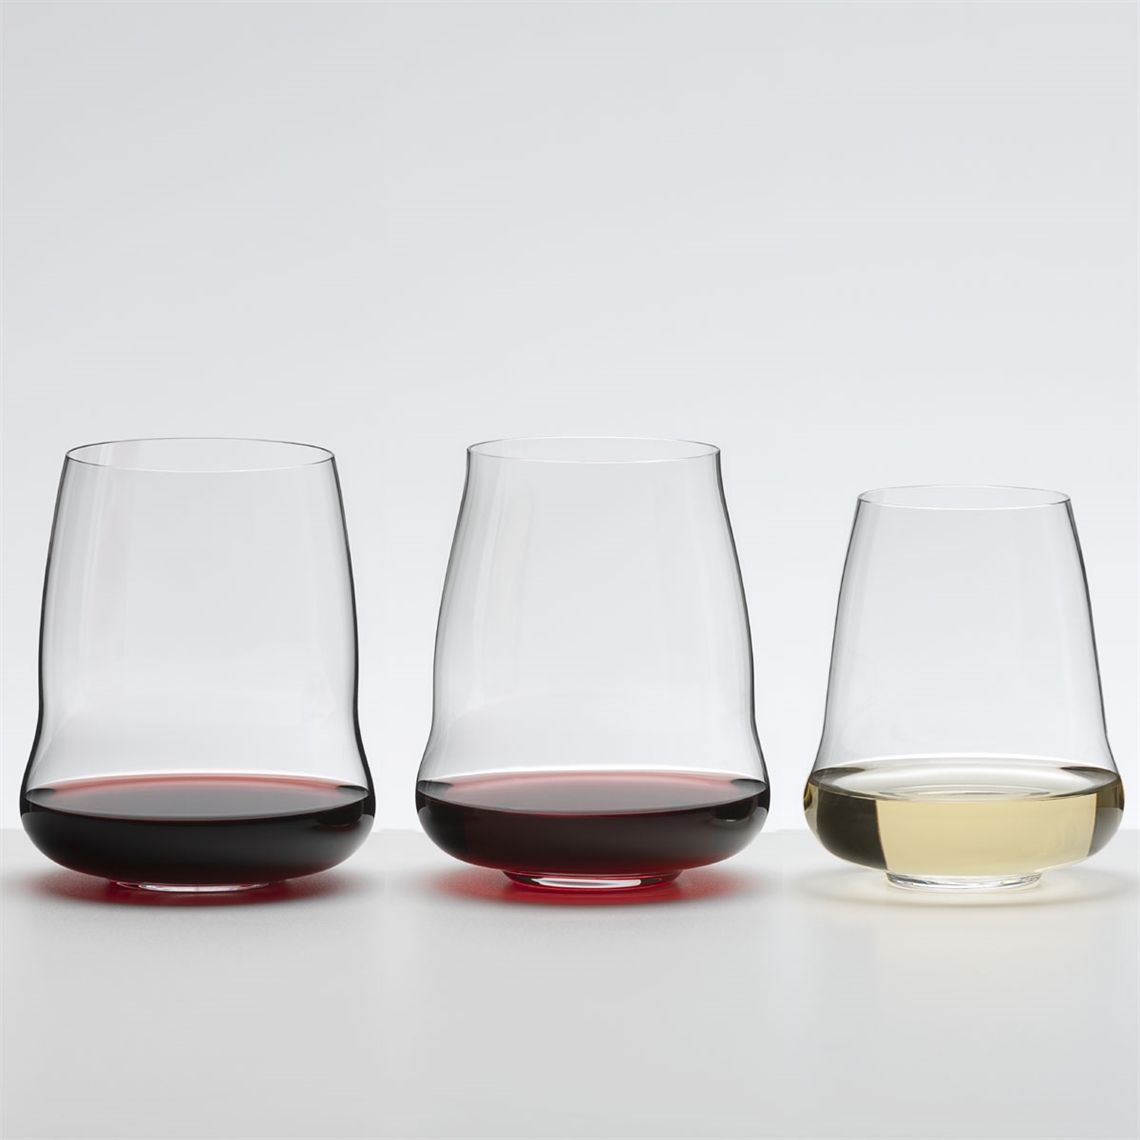 View our collection of Riedel Stemless Wings How to Clean Riedel Glasses